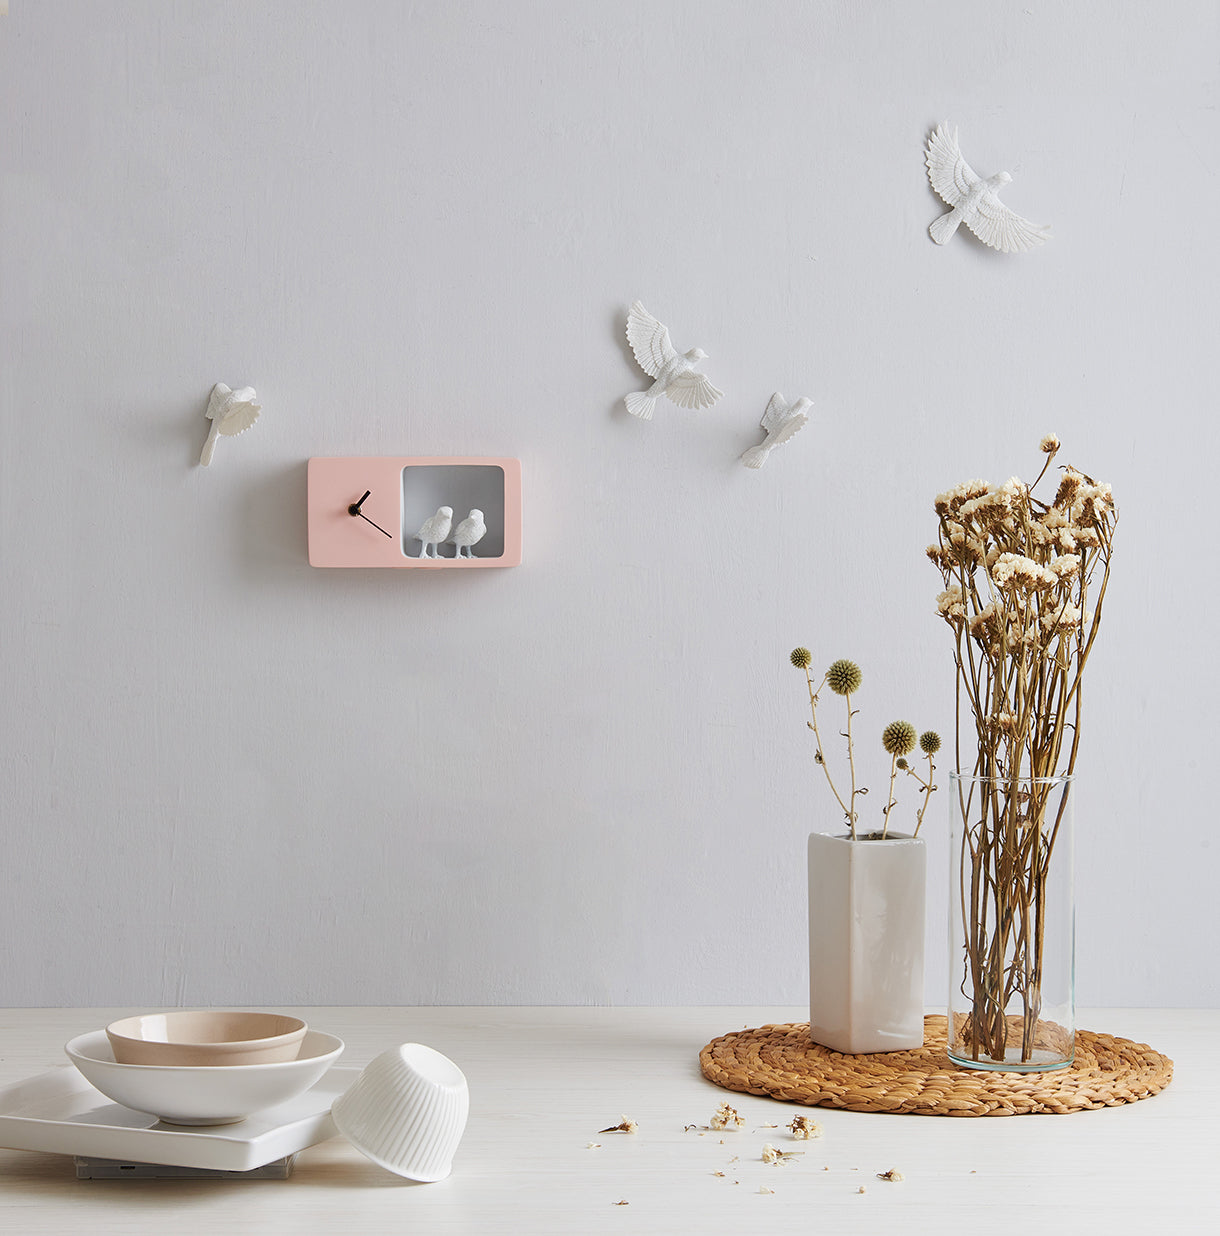 What Time is it in the Bird Nest Pink Sparrow to Modern Wall Clock and Pink Home Decor Accessories